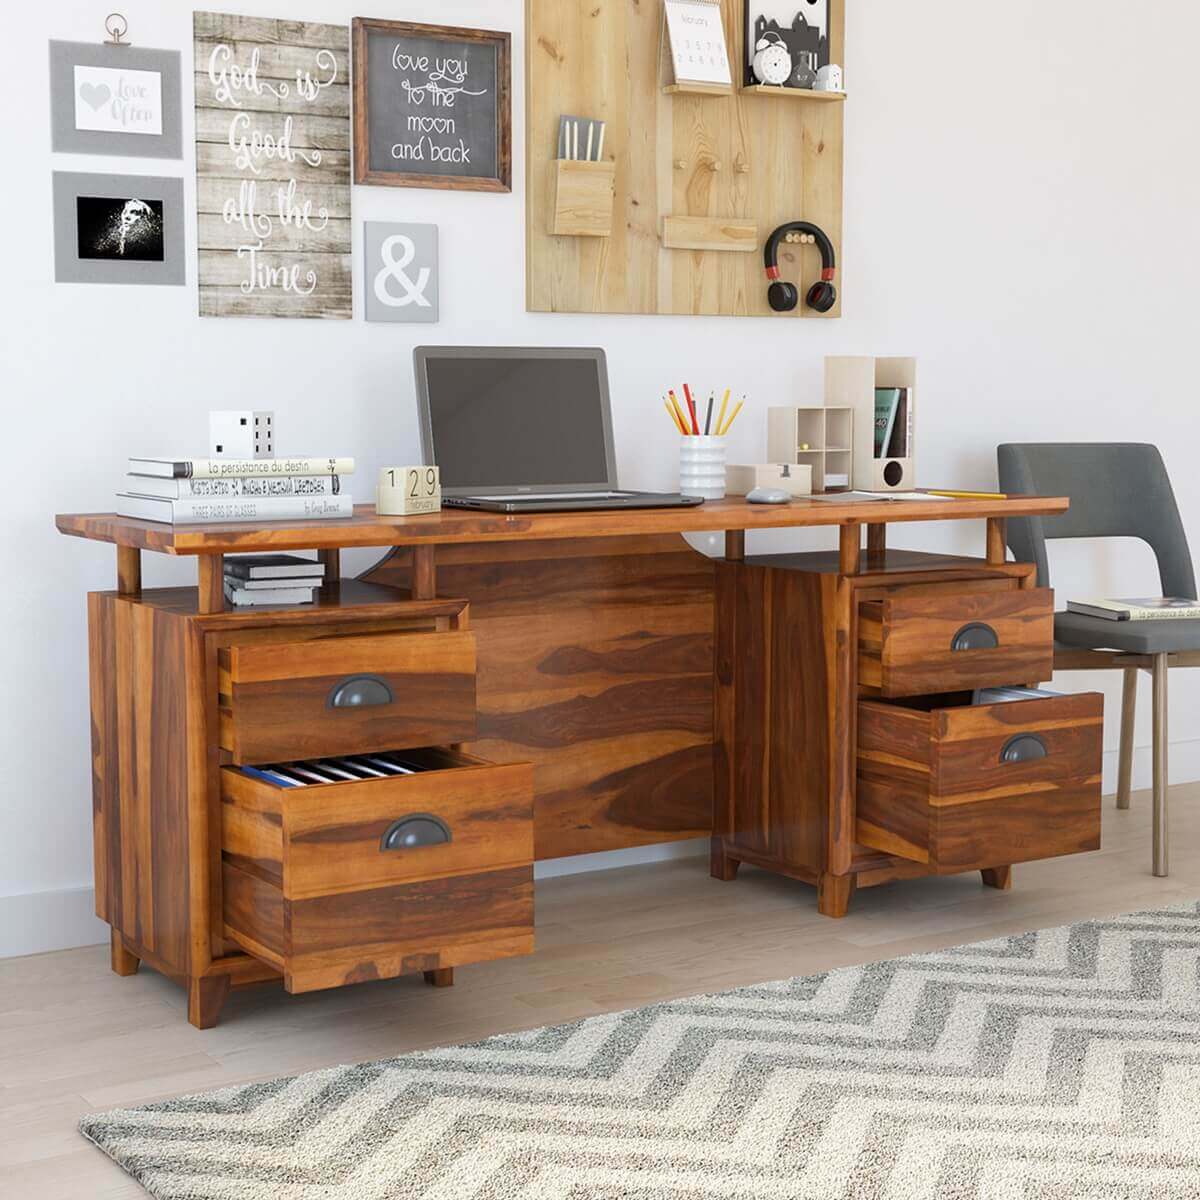 Hondah Rustic Solid wood 70 Inch Large Home Office Modern Executive Desk